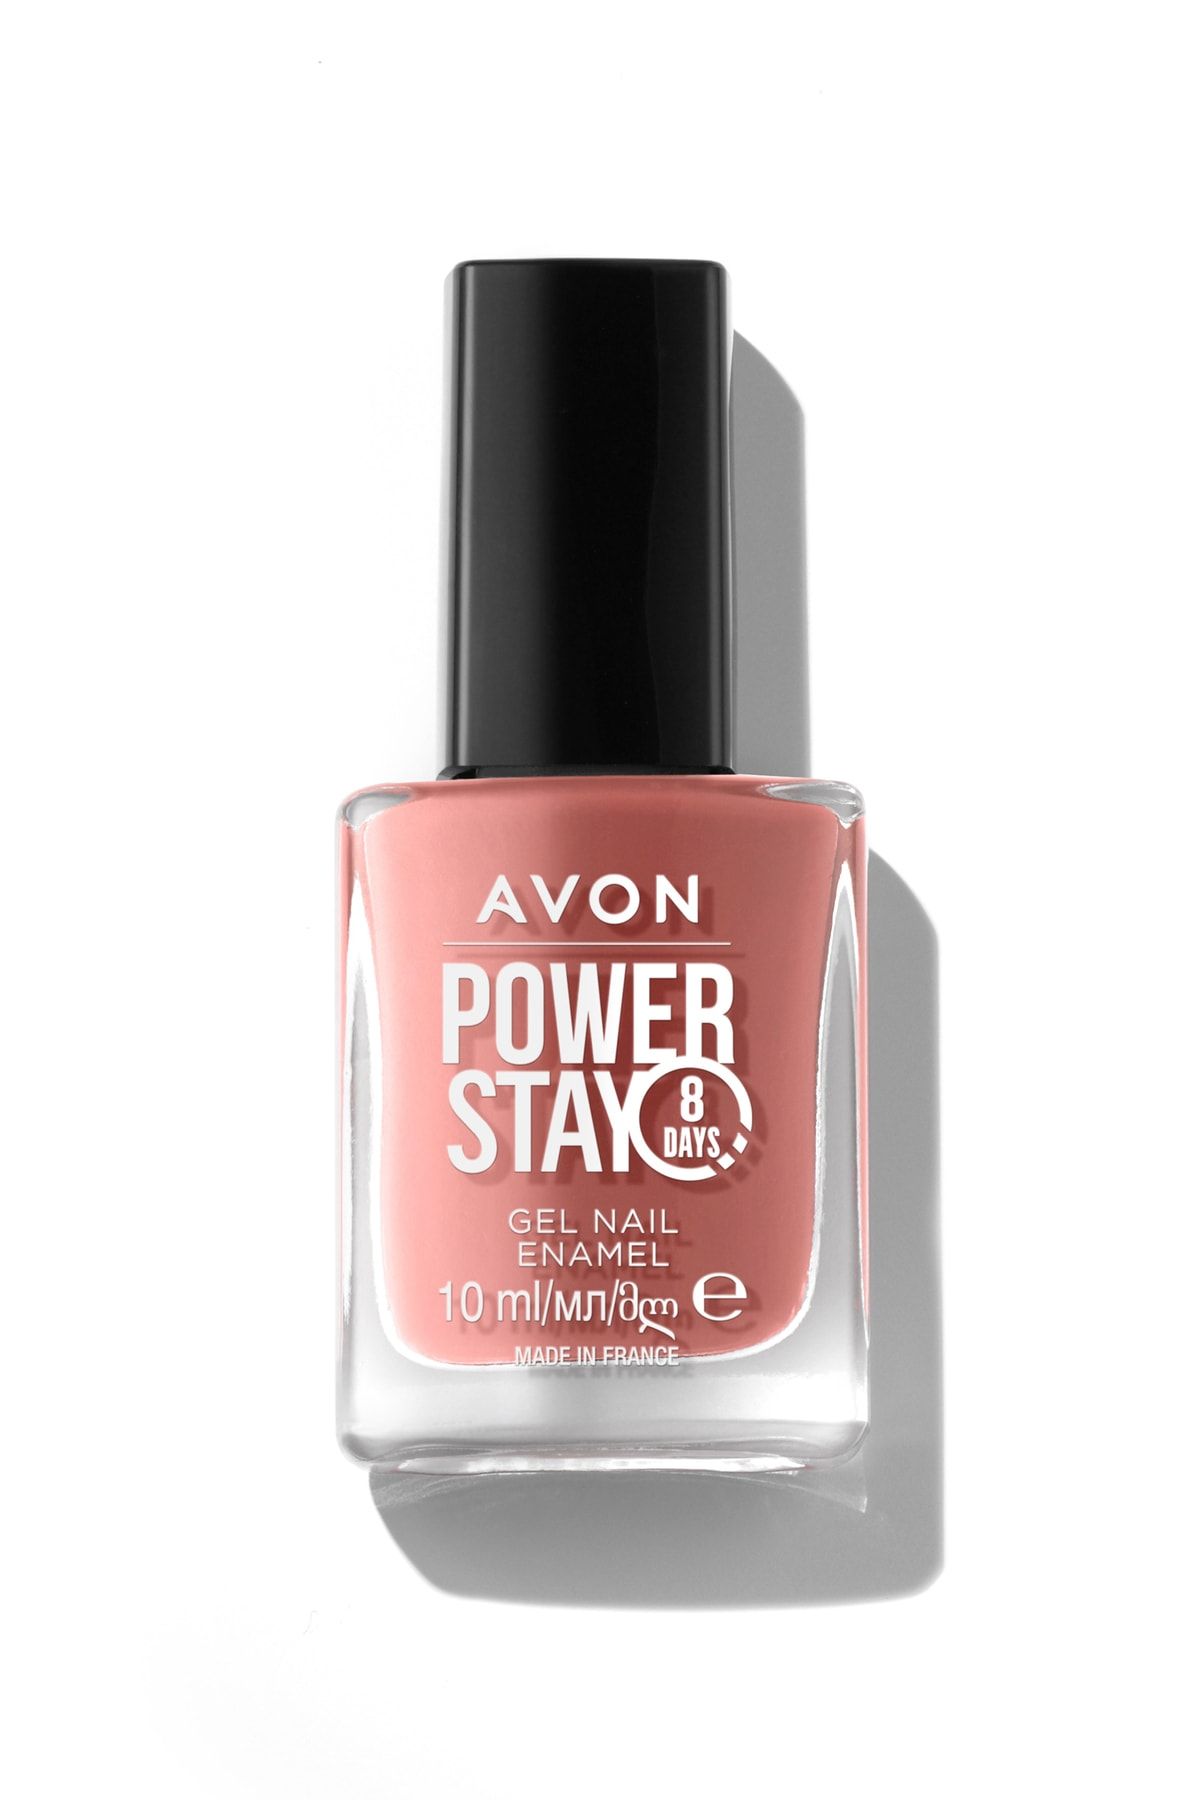 Avon Power Stay Jel Oje Can't Quit Cafe 10 ML.